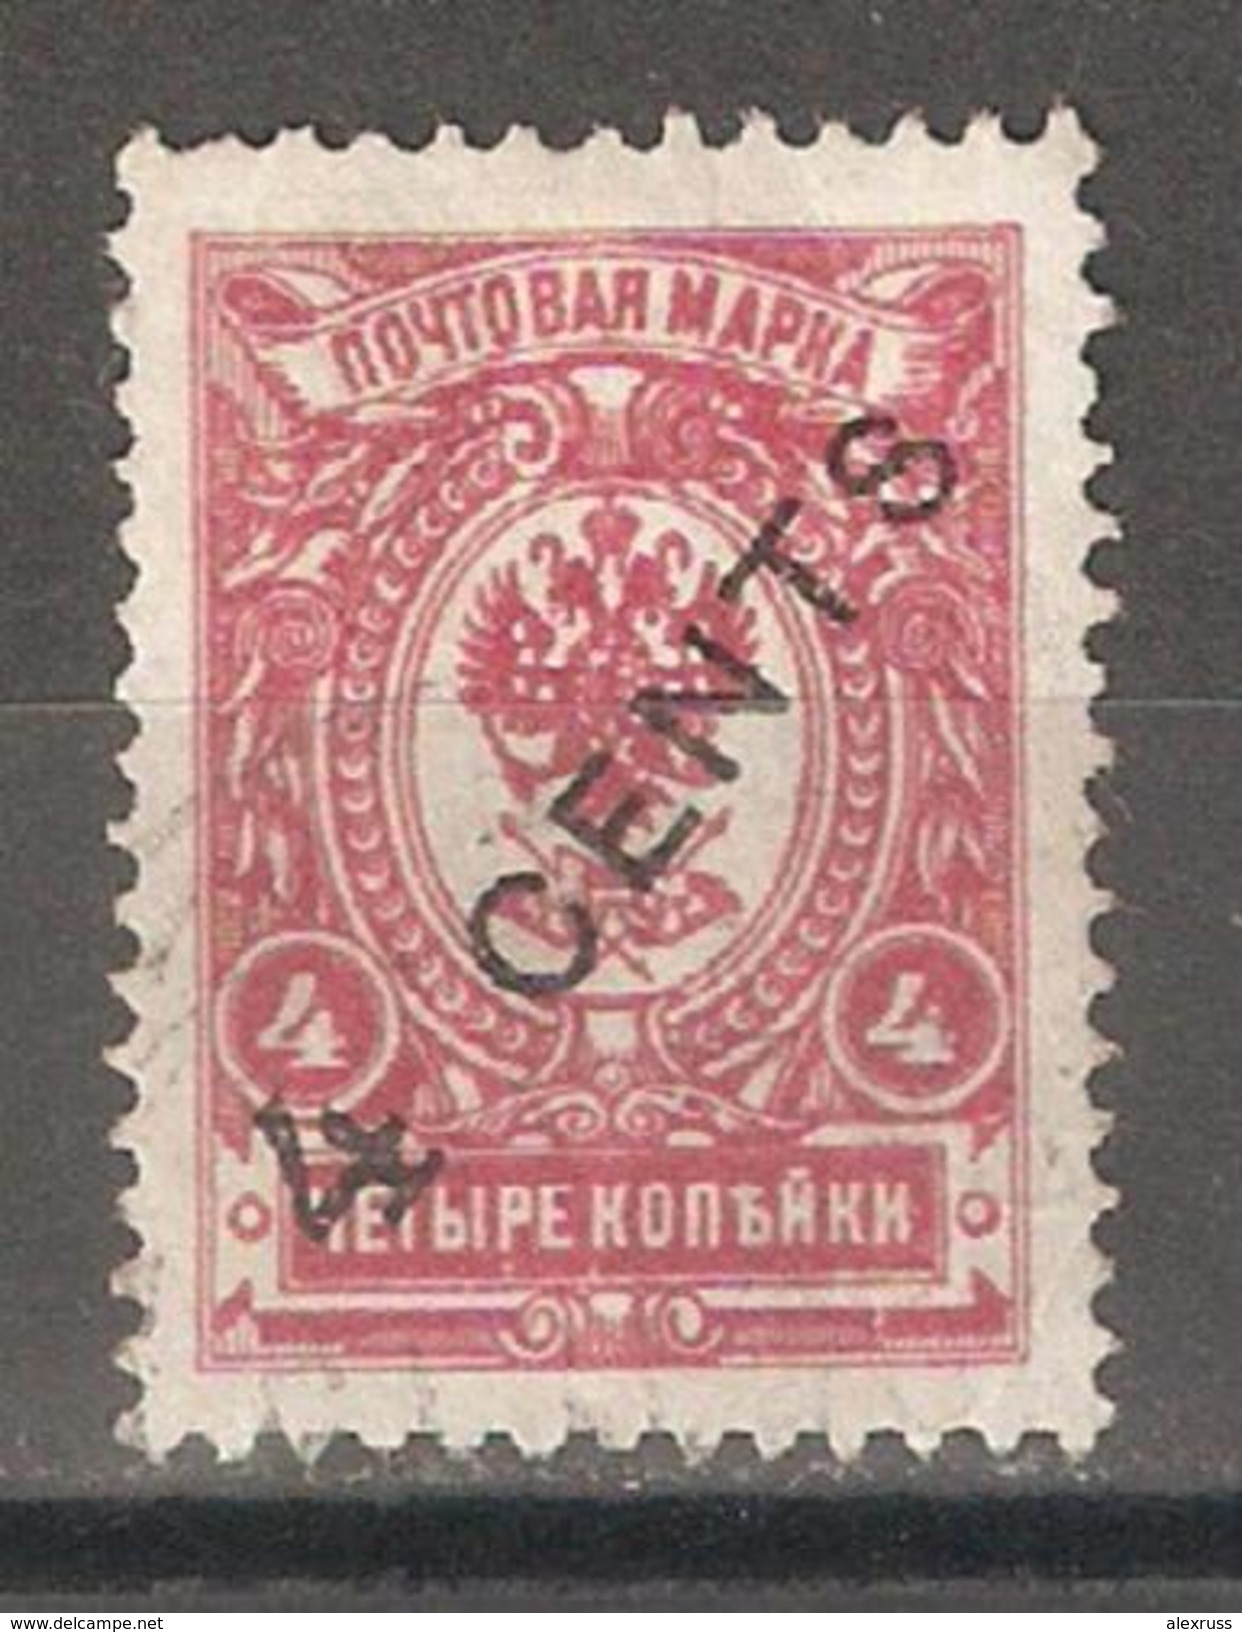 Russia 1917 Offices In China,4c On 4 Kop,Sc 53,VF USED (F-25) - China